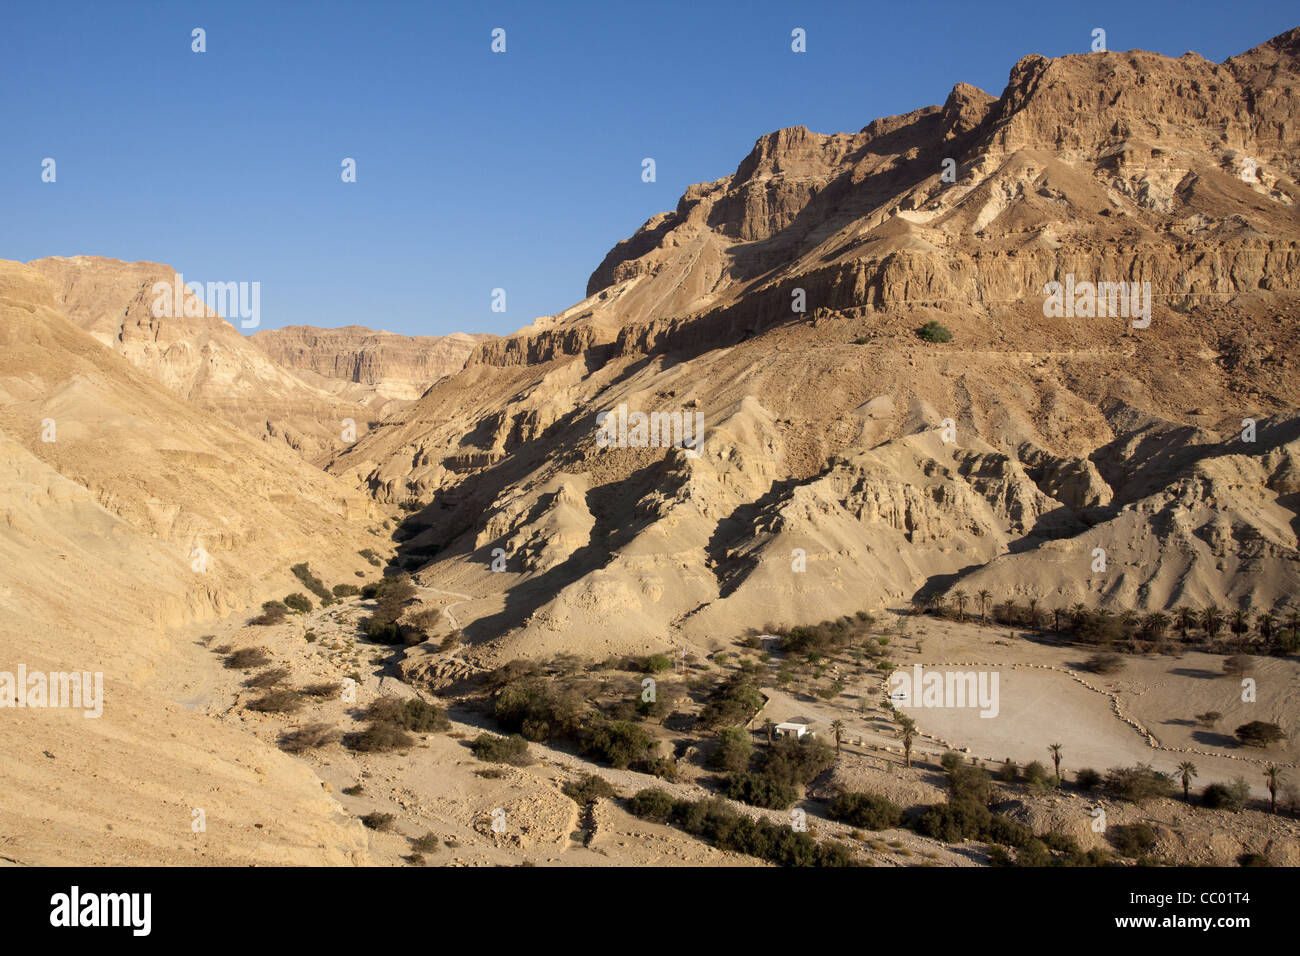 ENTRANCE TO THE VALLEY OF WADI ARUGOT, SEEN FROM THE KIBBUTZ IN THE EIN GEDI NATURE RESERVE, REGION OF THE DEAD SEA, ISRAEL Stock Photo